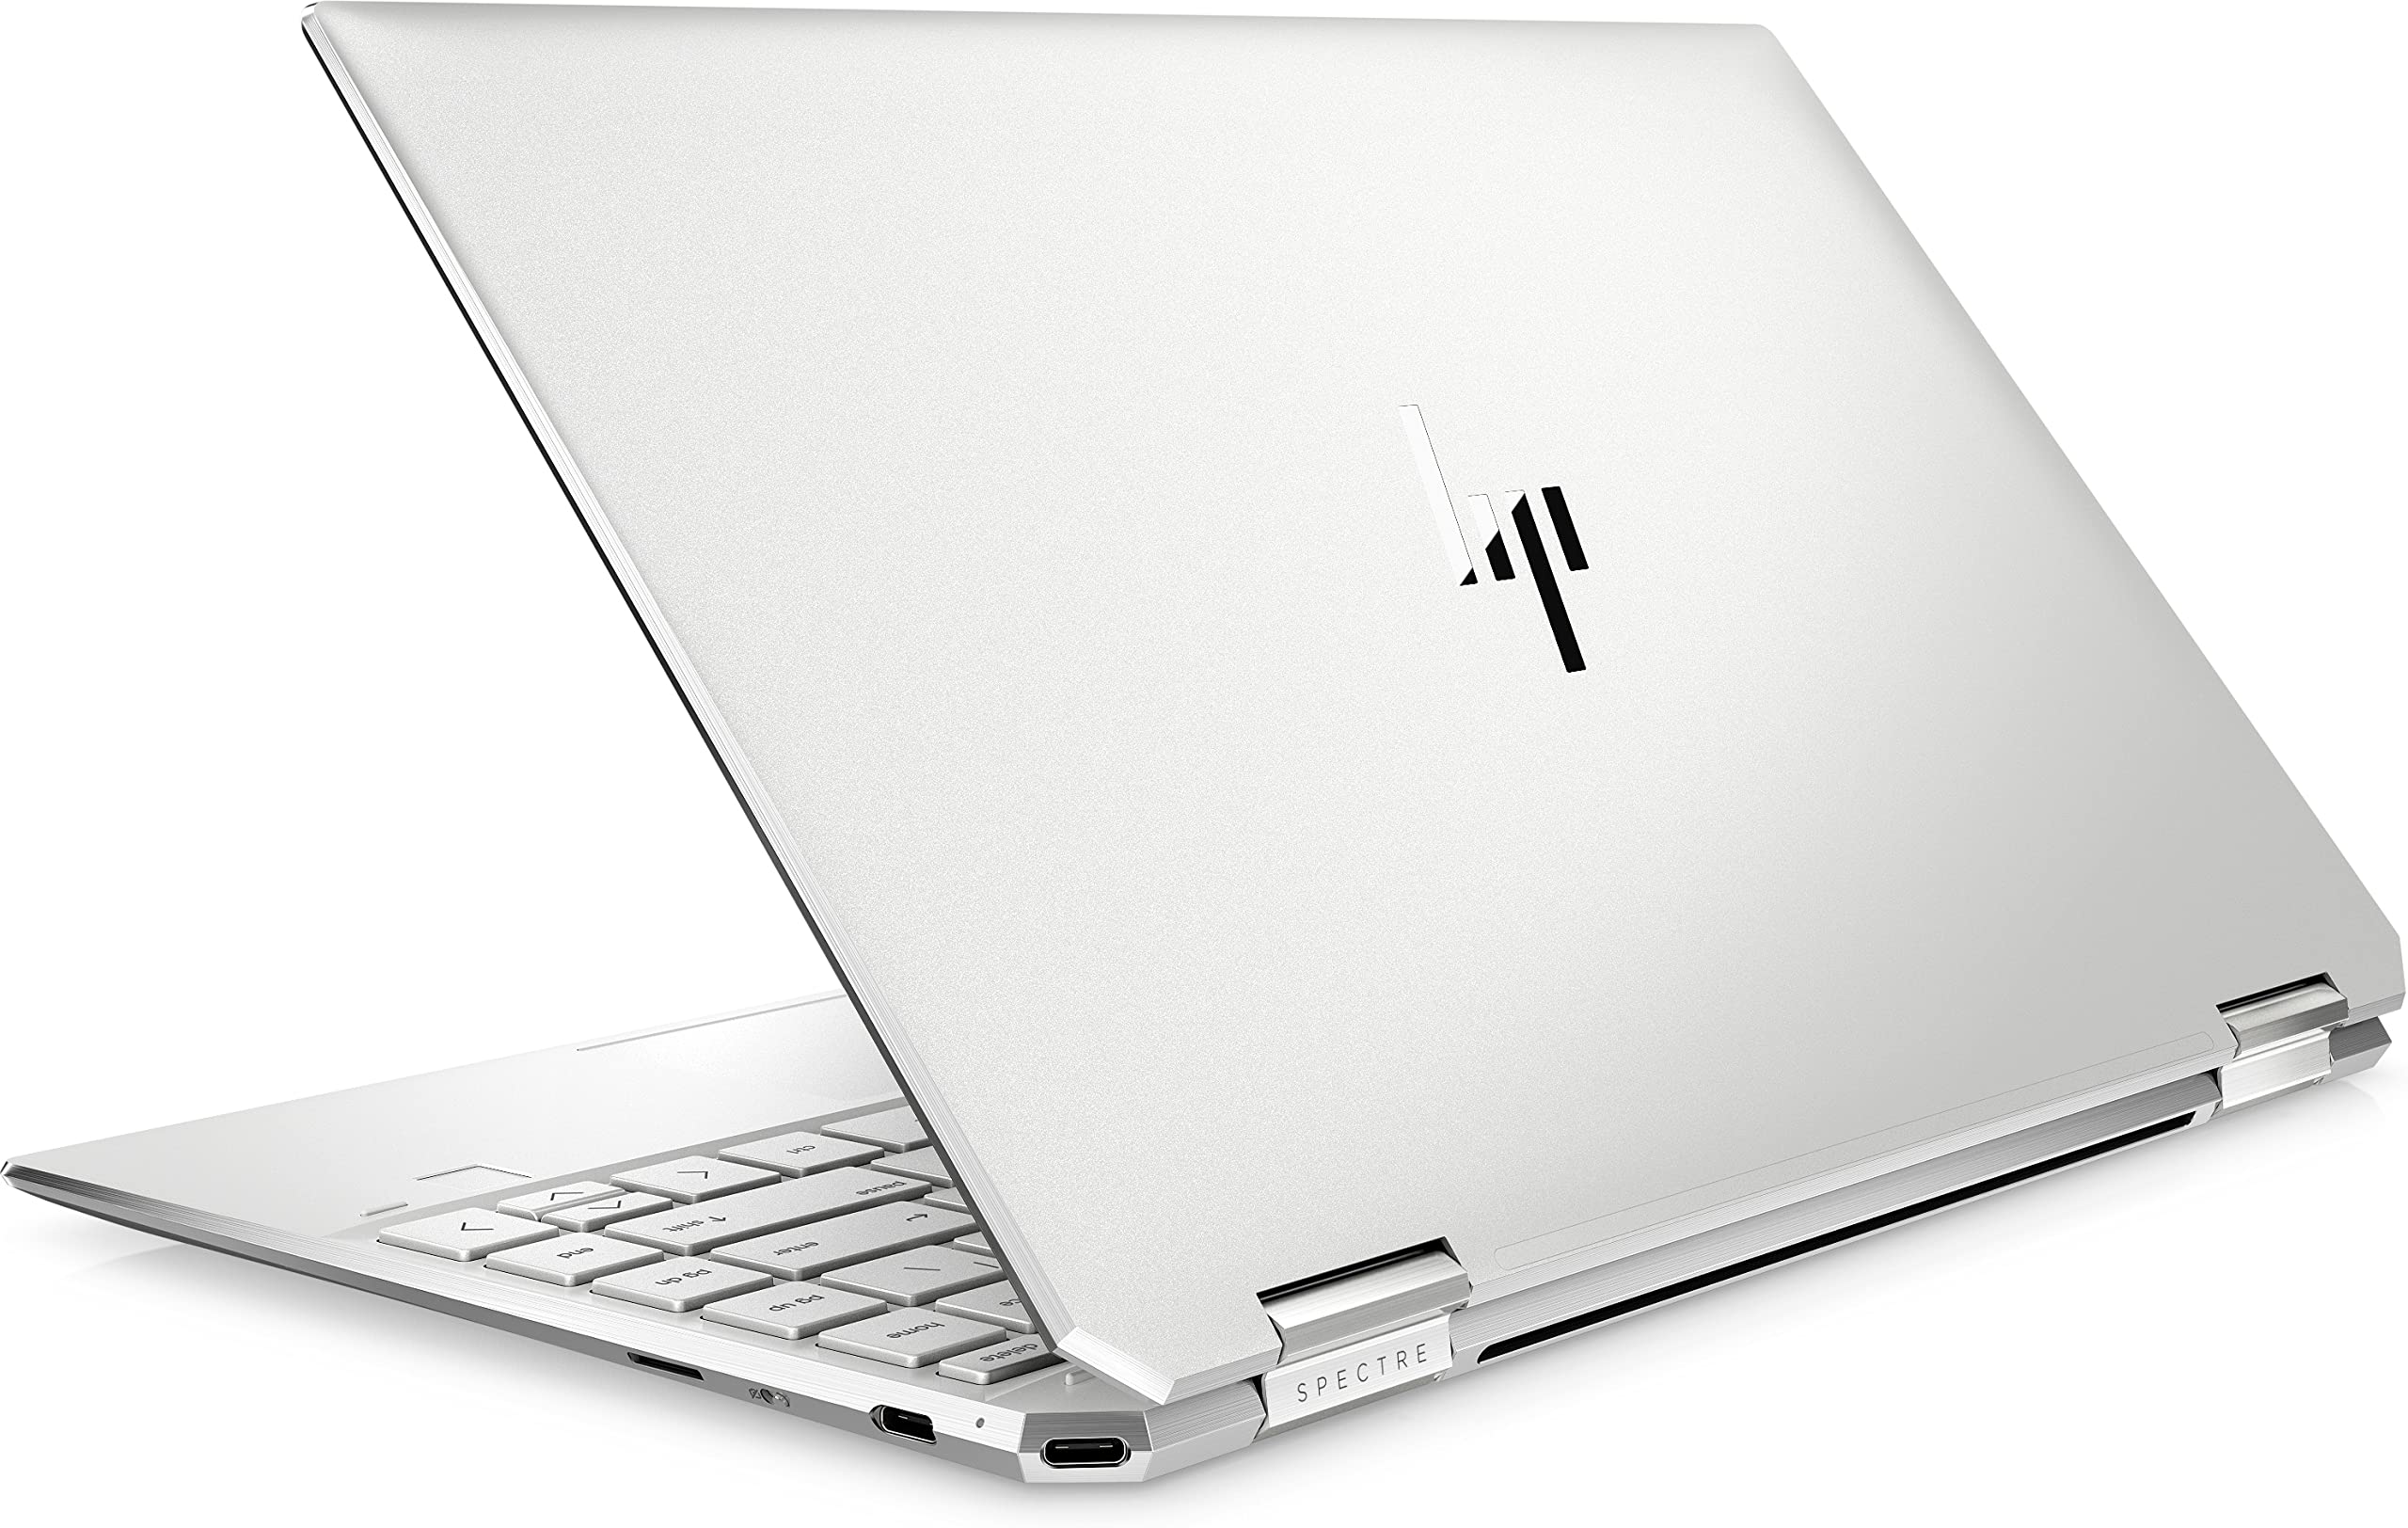 HP Spectre x360 13-aw0116na 13.3" FHD Touchscreen Hybrid 2-in-1 Laptop - i7-1065G7, 1TB SSD, 8GB DDR4, Sure View Privacy Screen, Backlit Keys, WIFI 6 & BT 5, FREE Windows 11 Pro upgrade (Renewed)